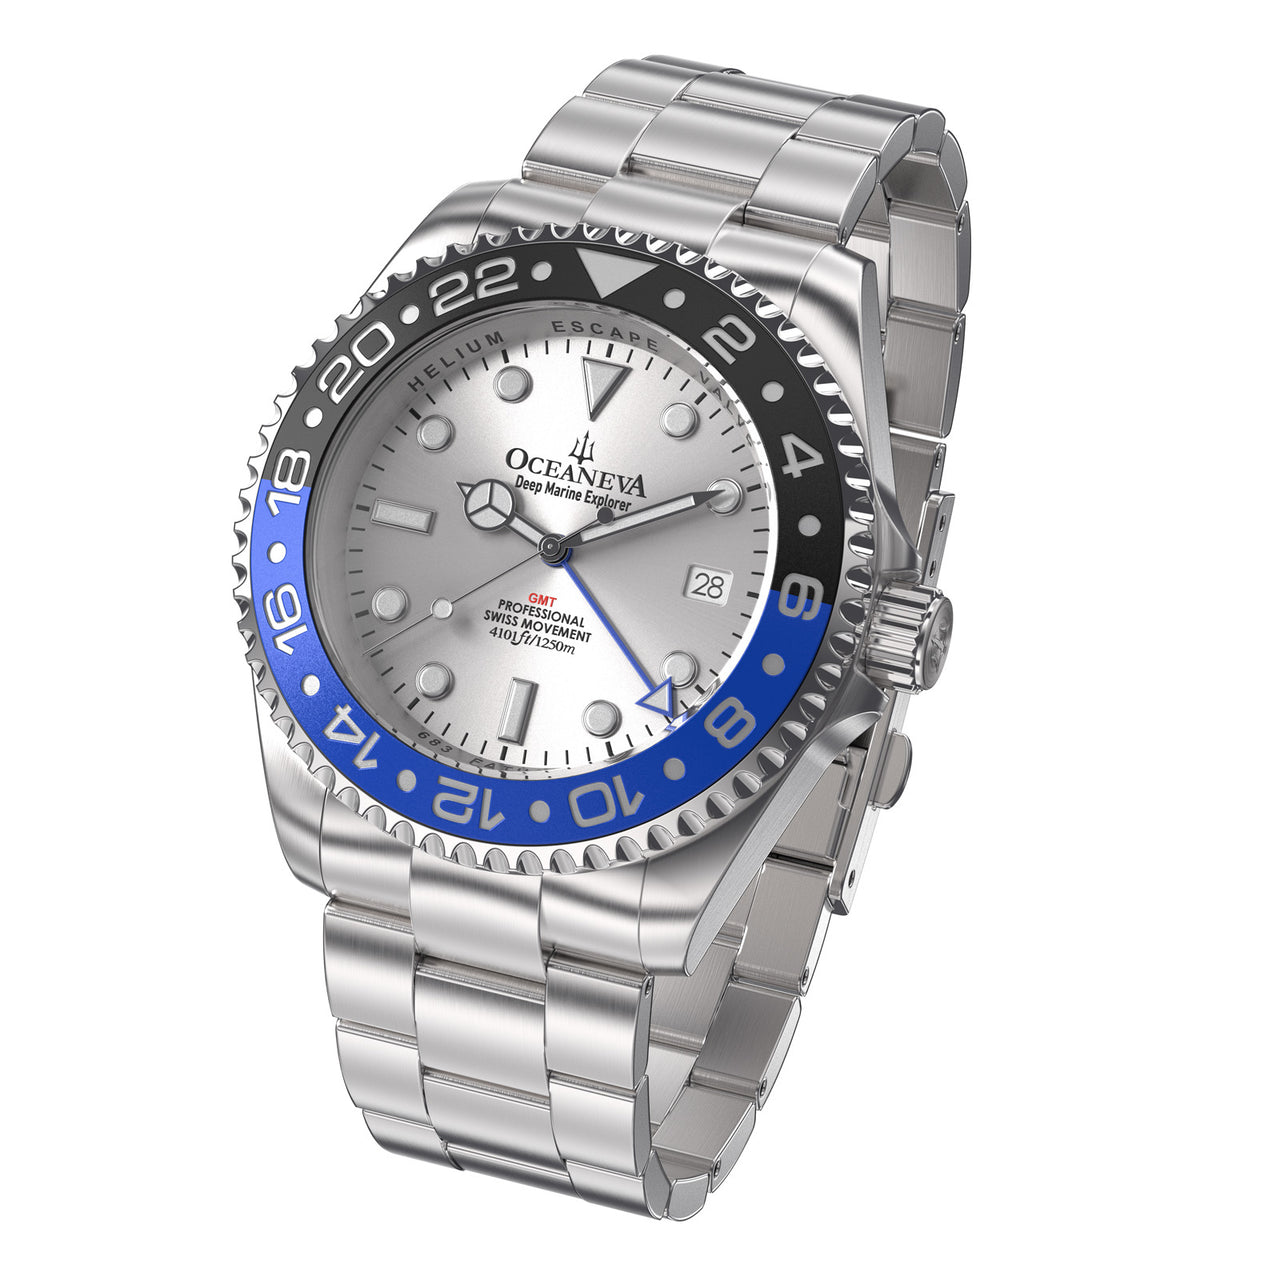 Oceaneva 1250M GMT Dive Watch Silver Blue And Black Front Picture Slight Left Slant View